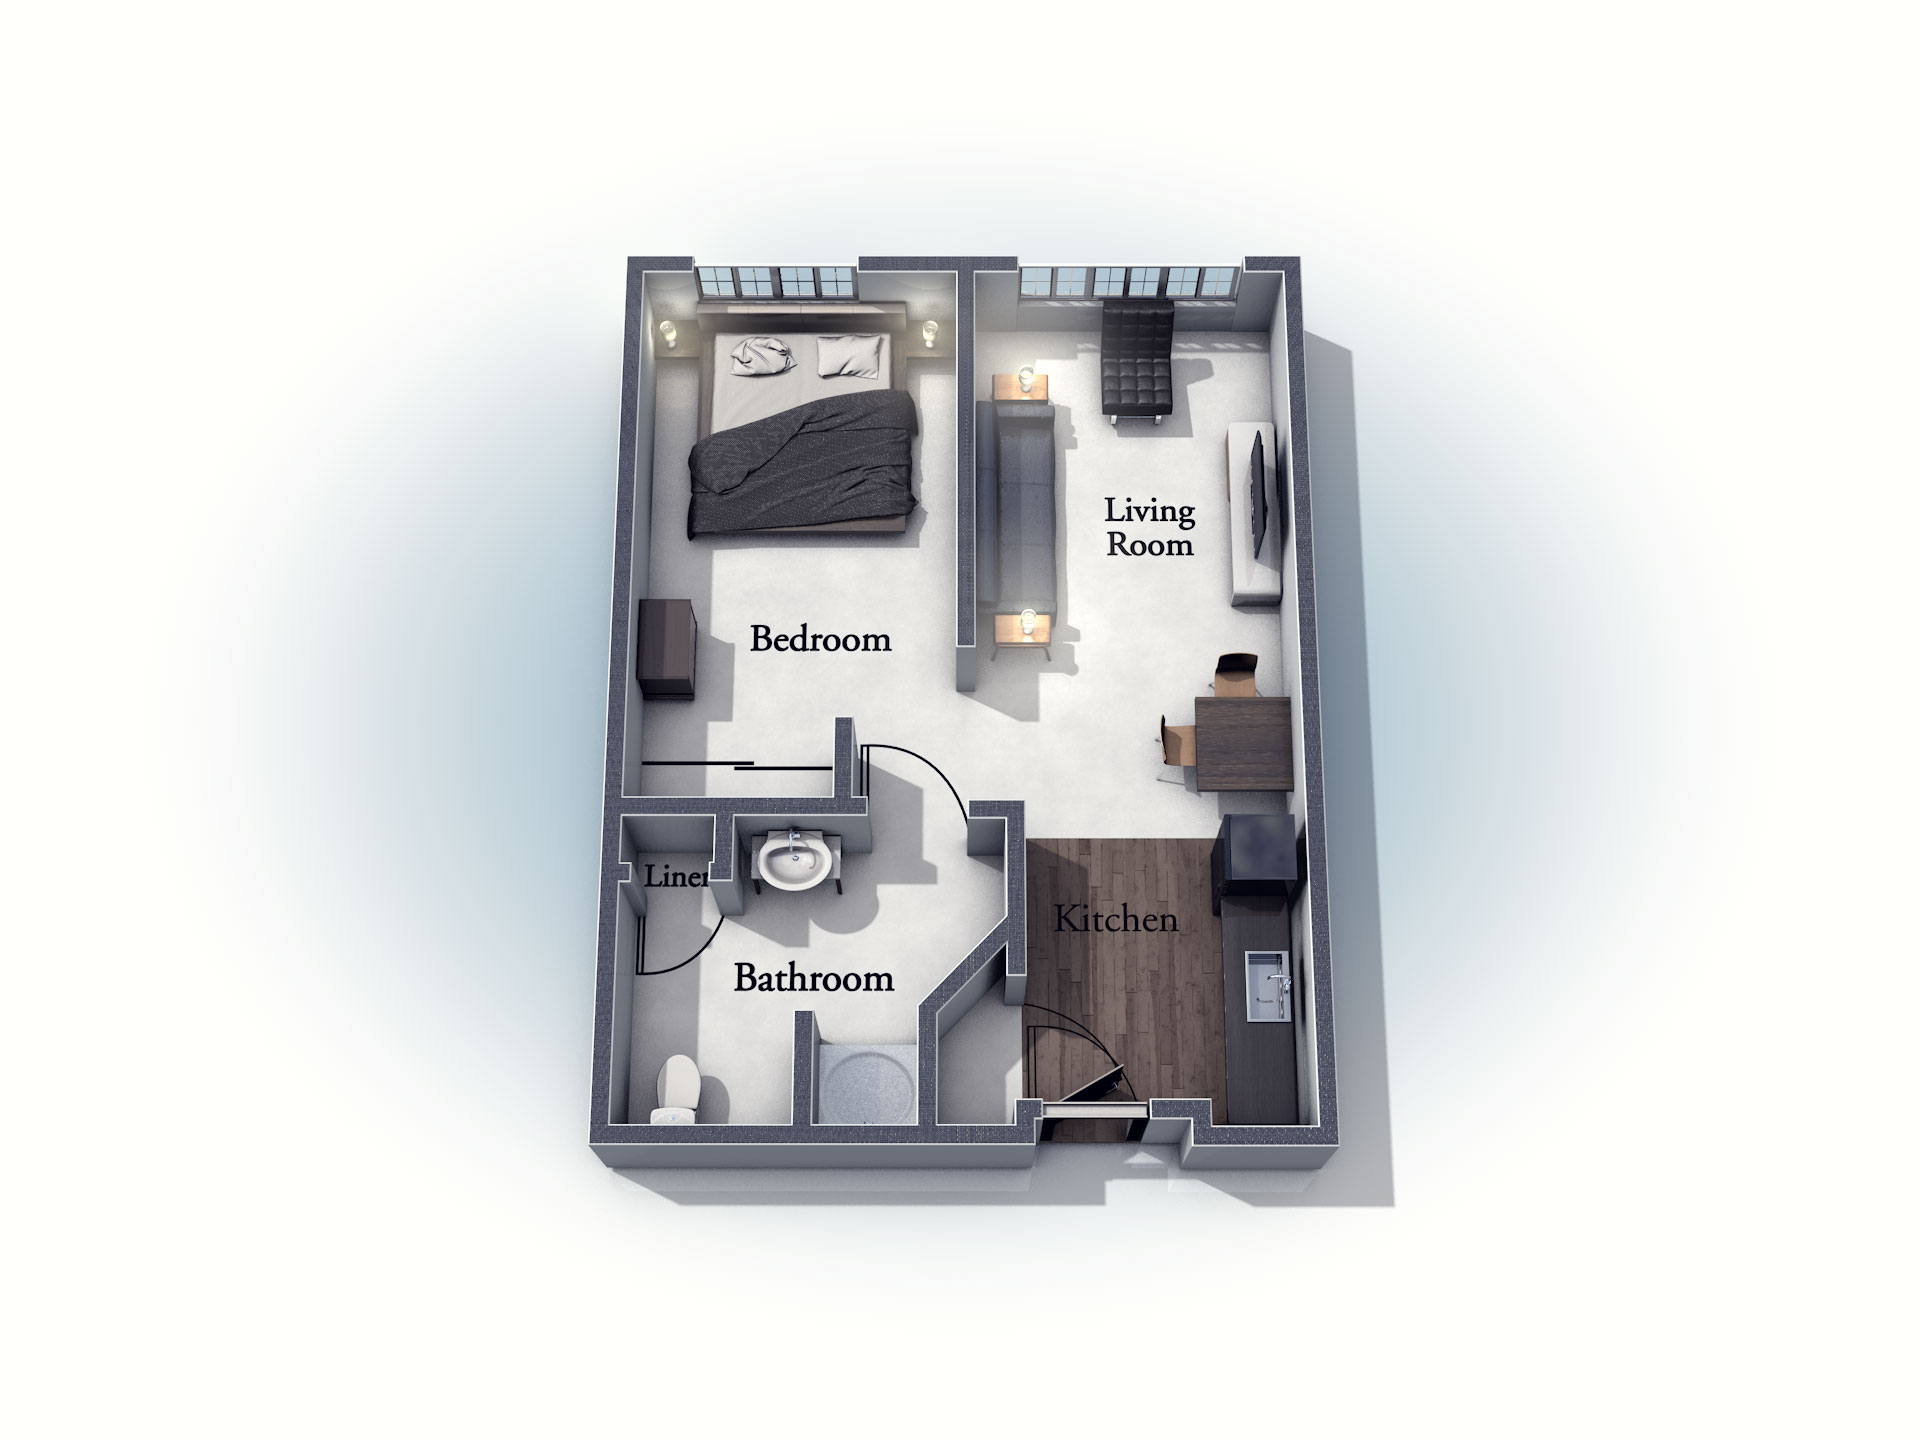 This 3D rendering of the Alton living space shows an example of the floor plan layout. Please contact the Summit Pointe Senior Living Community for more information.